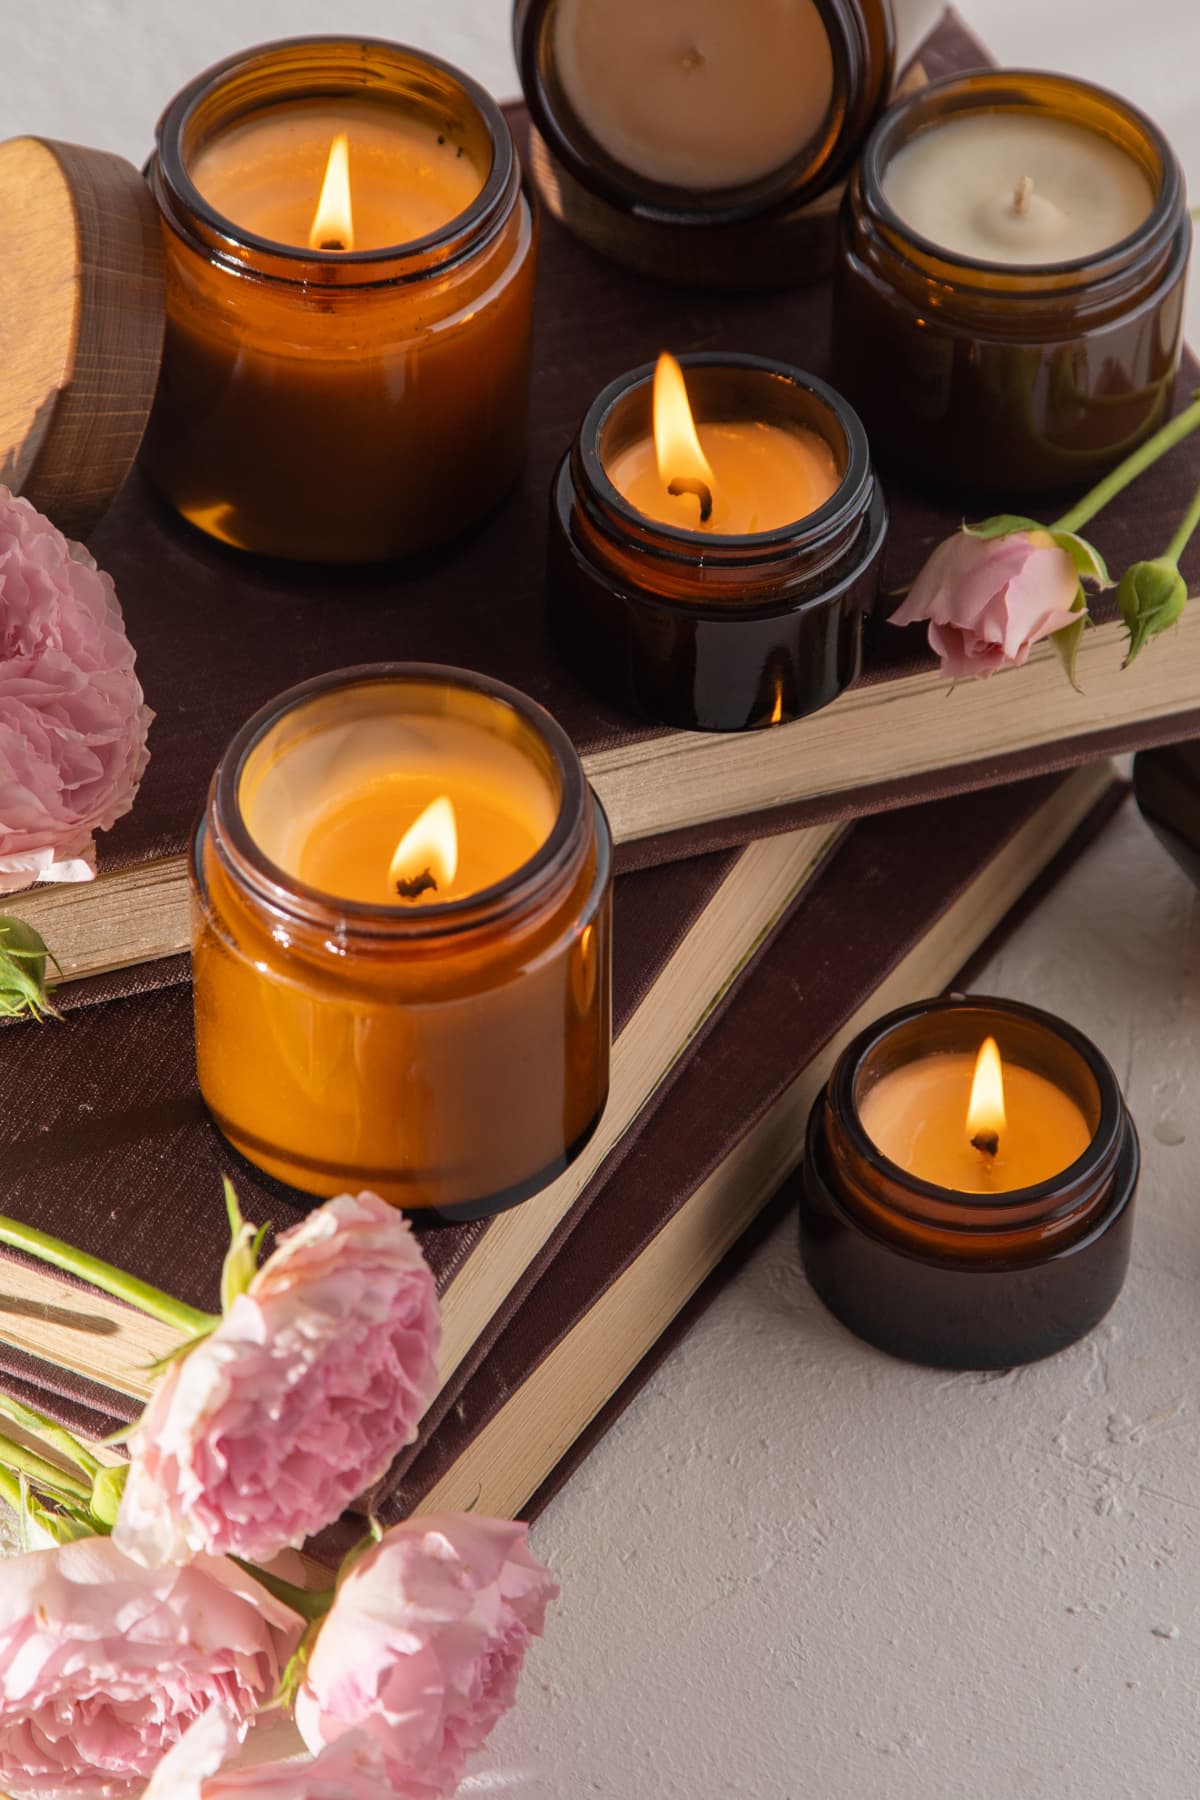 An artful arrangement of aromatic candles in brown glass jars, accompanied by roses